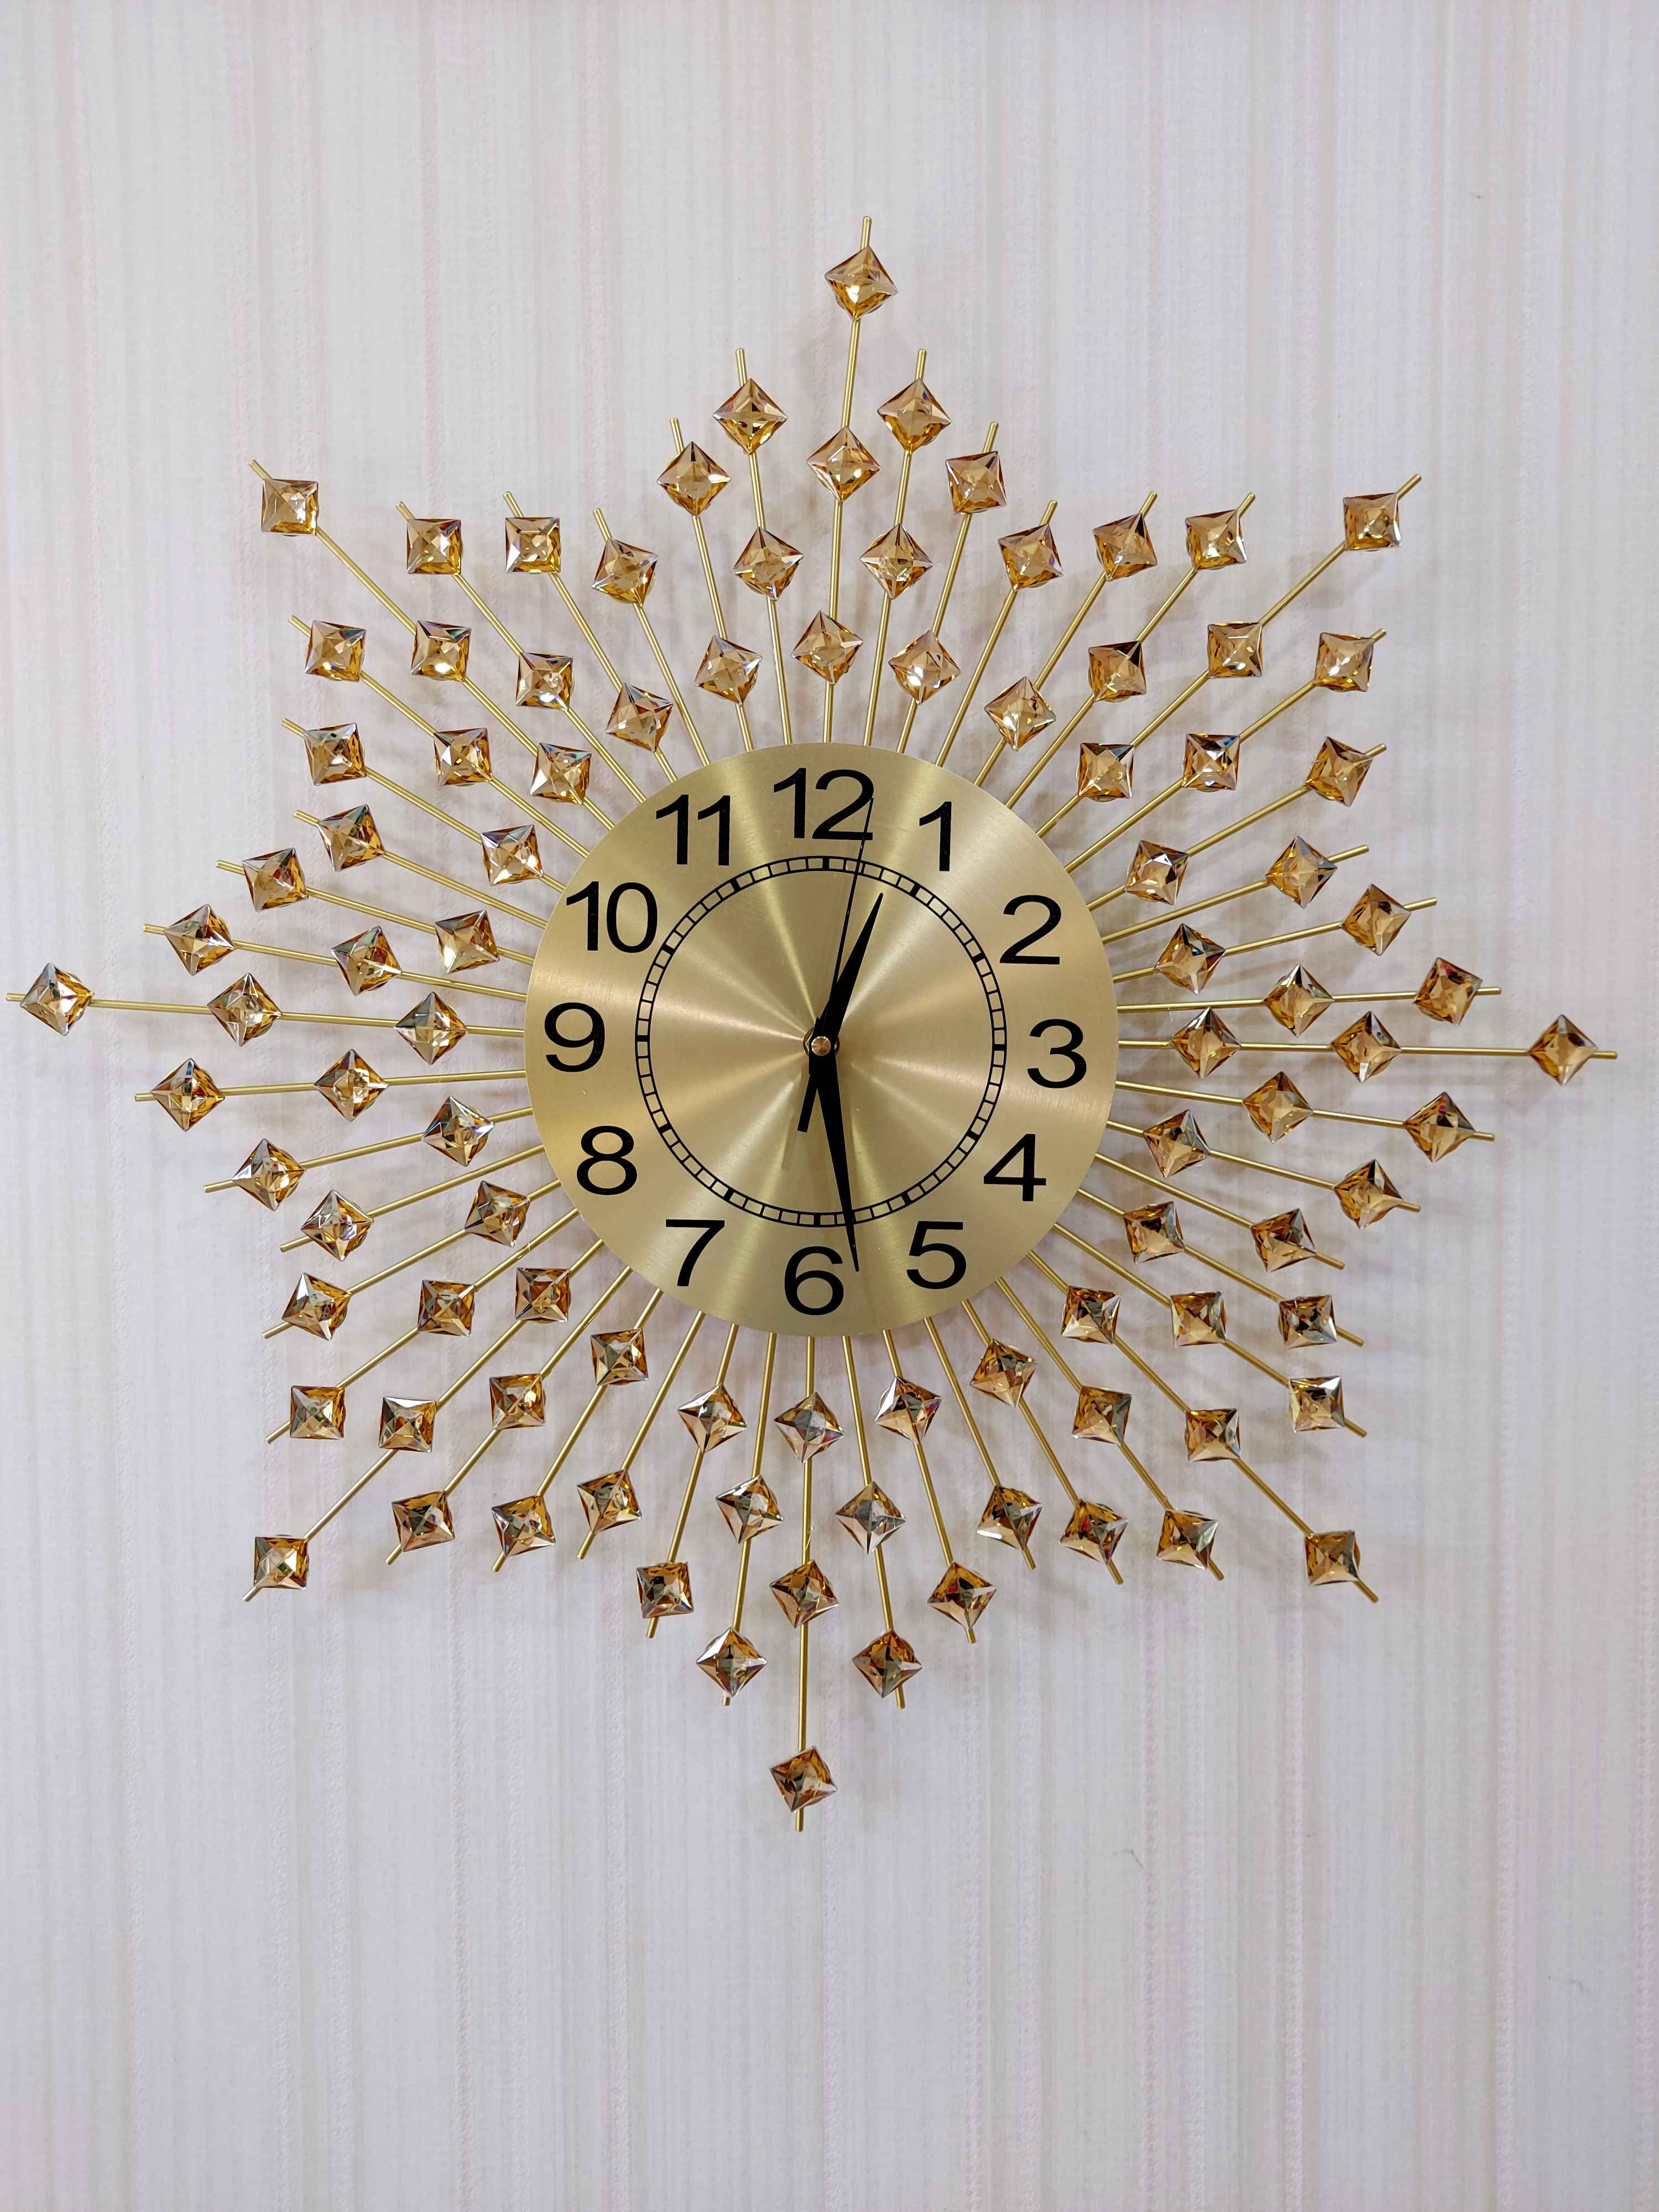 FunkyTradition 3D Star Diamond Studded Wall Clock, Wall Watch, Wall Decor for Home Office Decor and Gifts 62 CM Tall